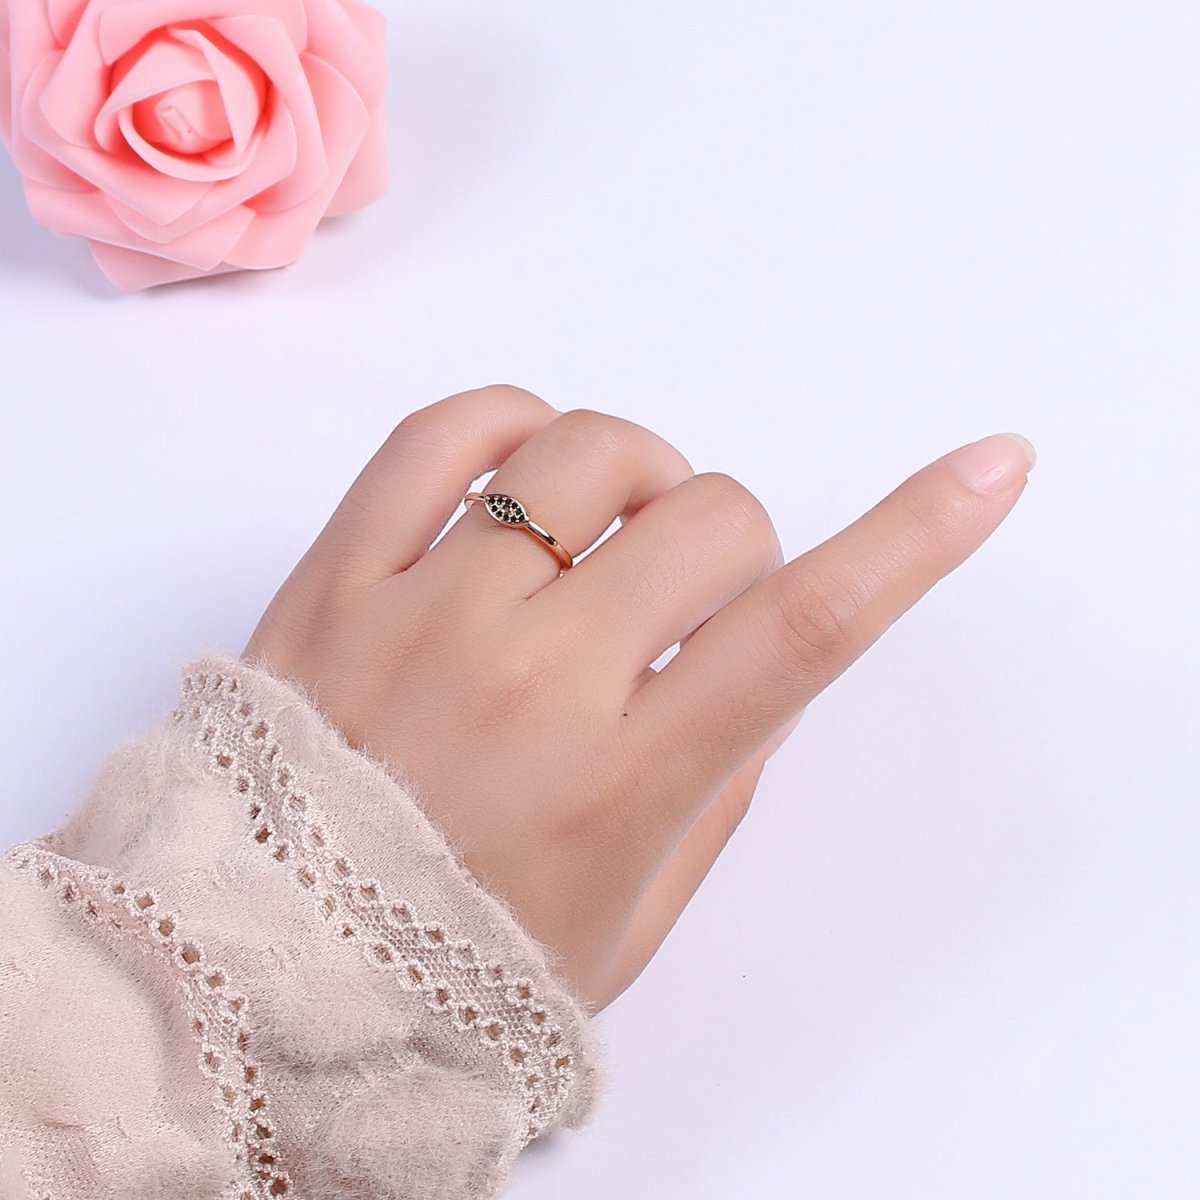 Dainty Black Evil Eye Stacking Ring, Gold Minimalist Ring, Simple Open Ring, Thin Adjustable Ring, Amulet Jewelry Delicate Ring, Gift for her S-249 - DLUXCA